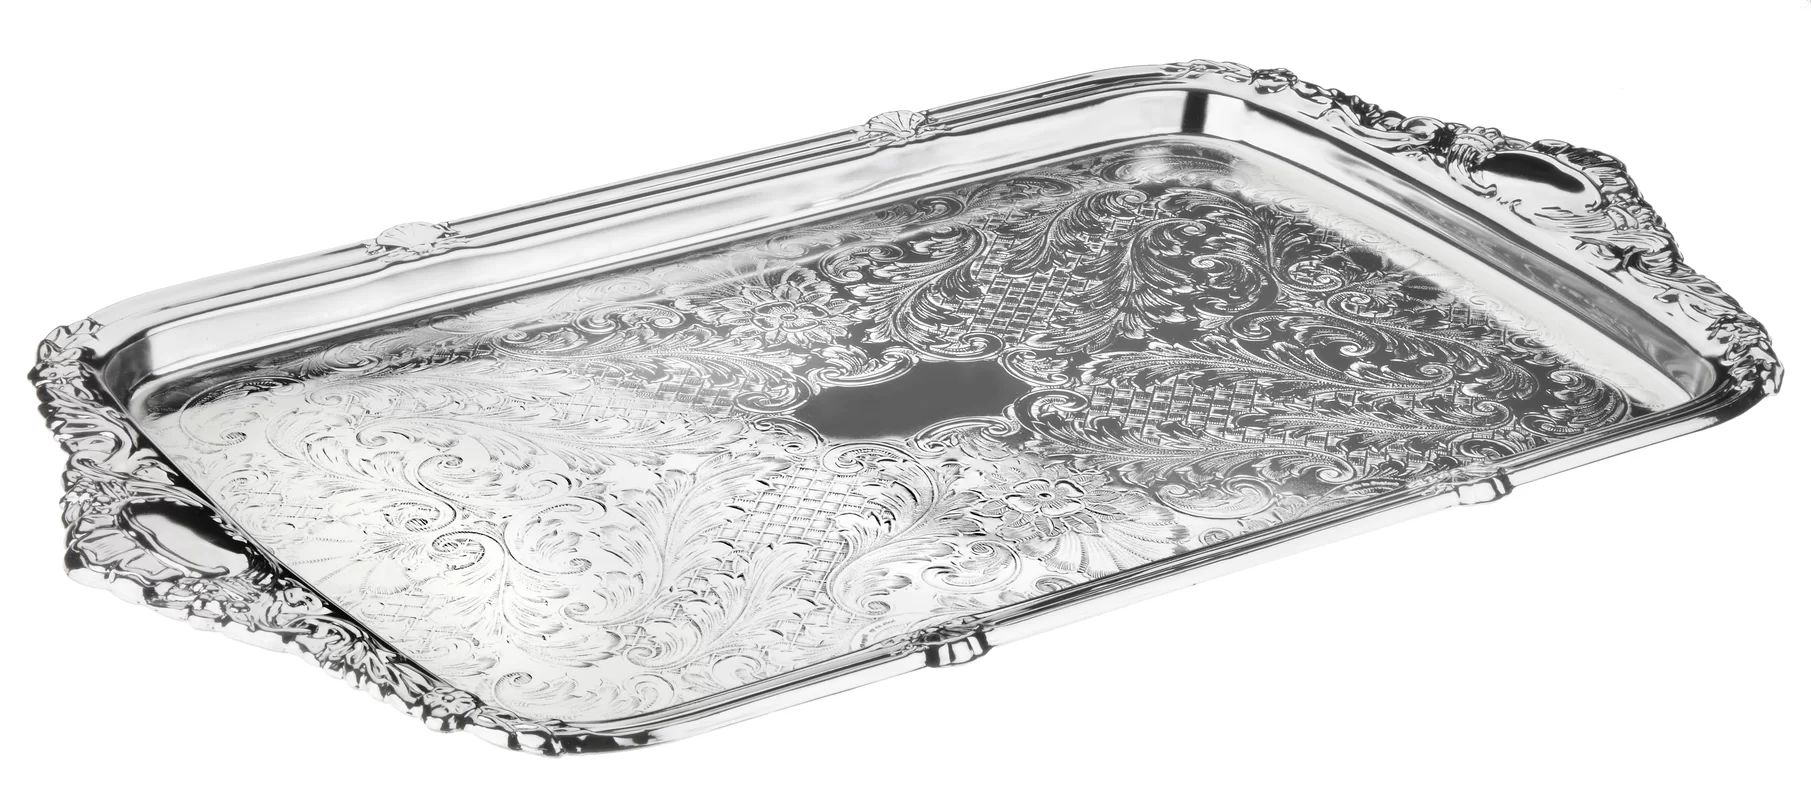 Queen Anne Oblong Tray with Integral Handle | Wayfair North America